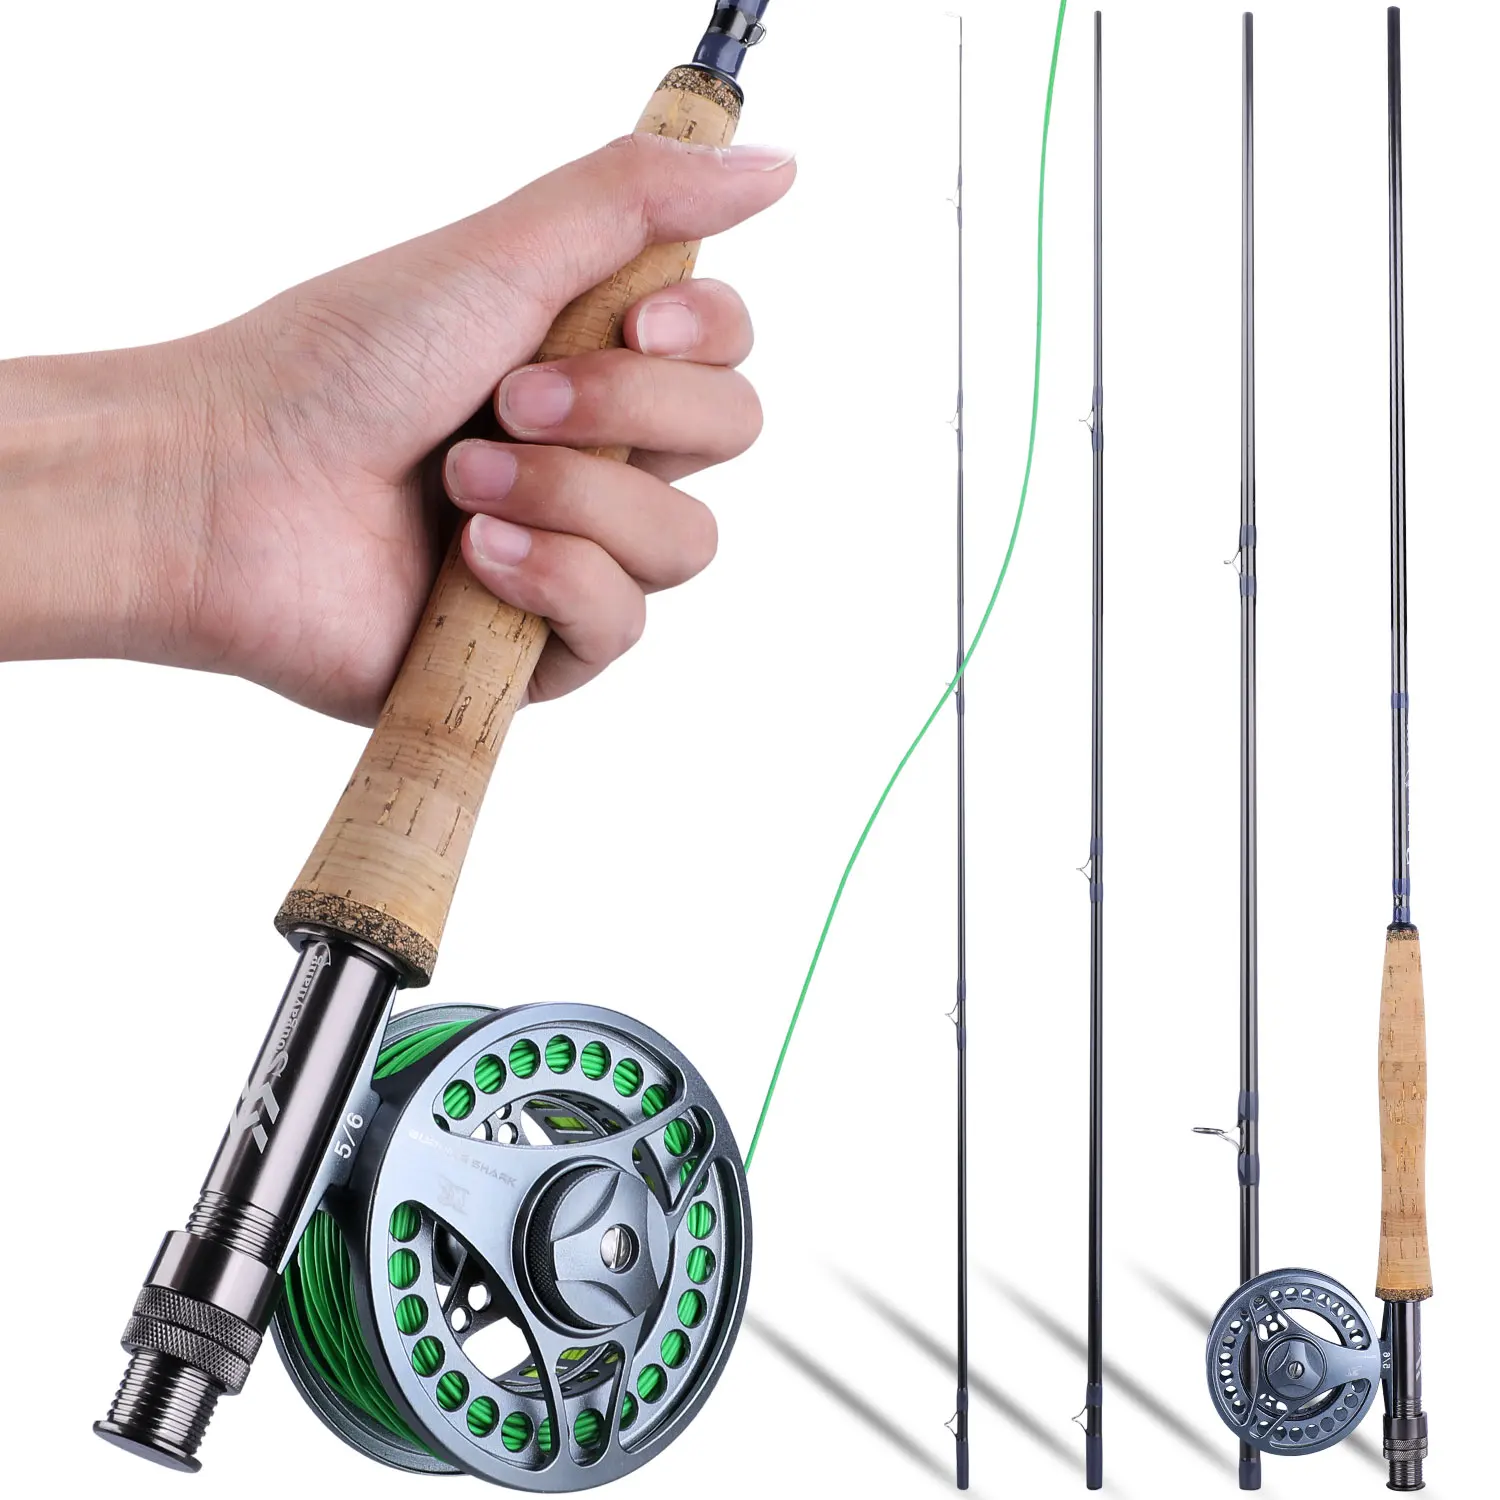 Sougayilang 2.7m Fly Fishing Rod Combo Ultralight Fly Rods and 5/6 7/